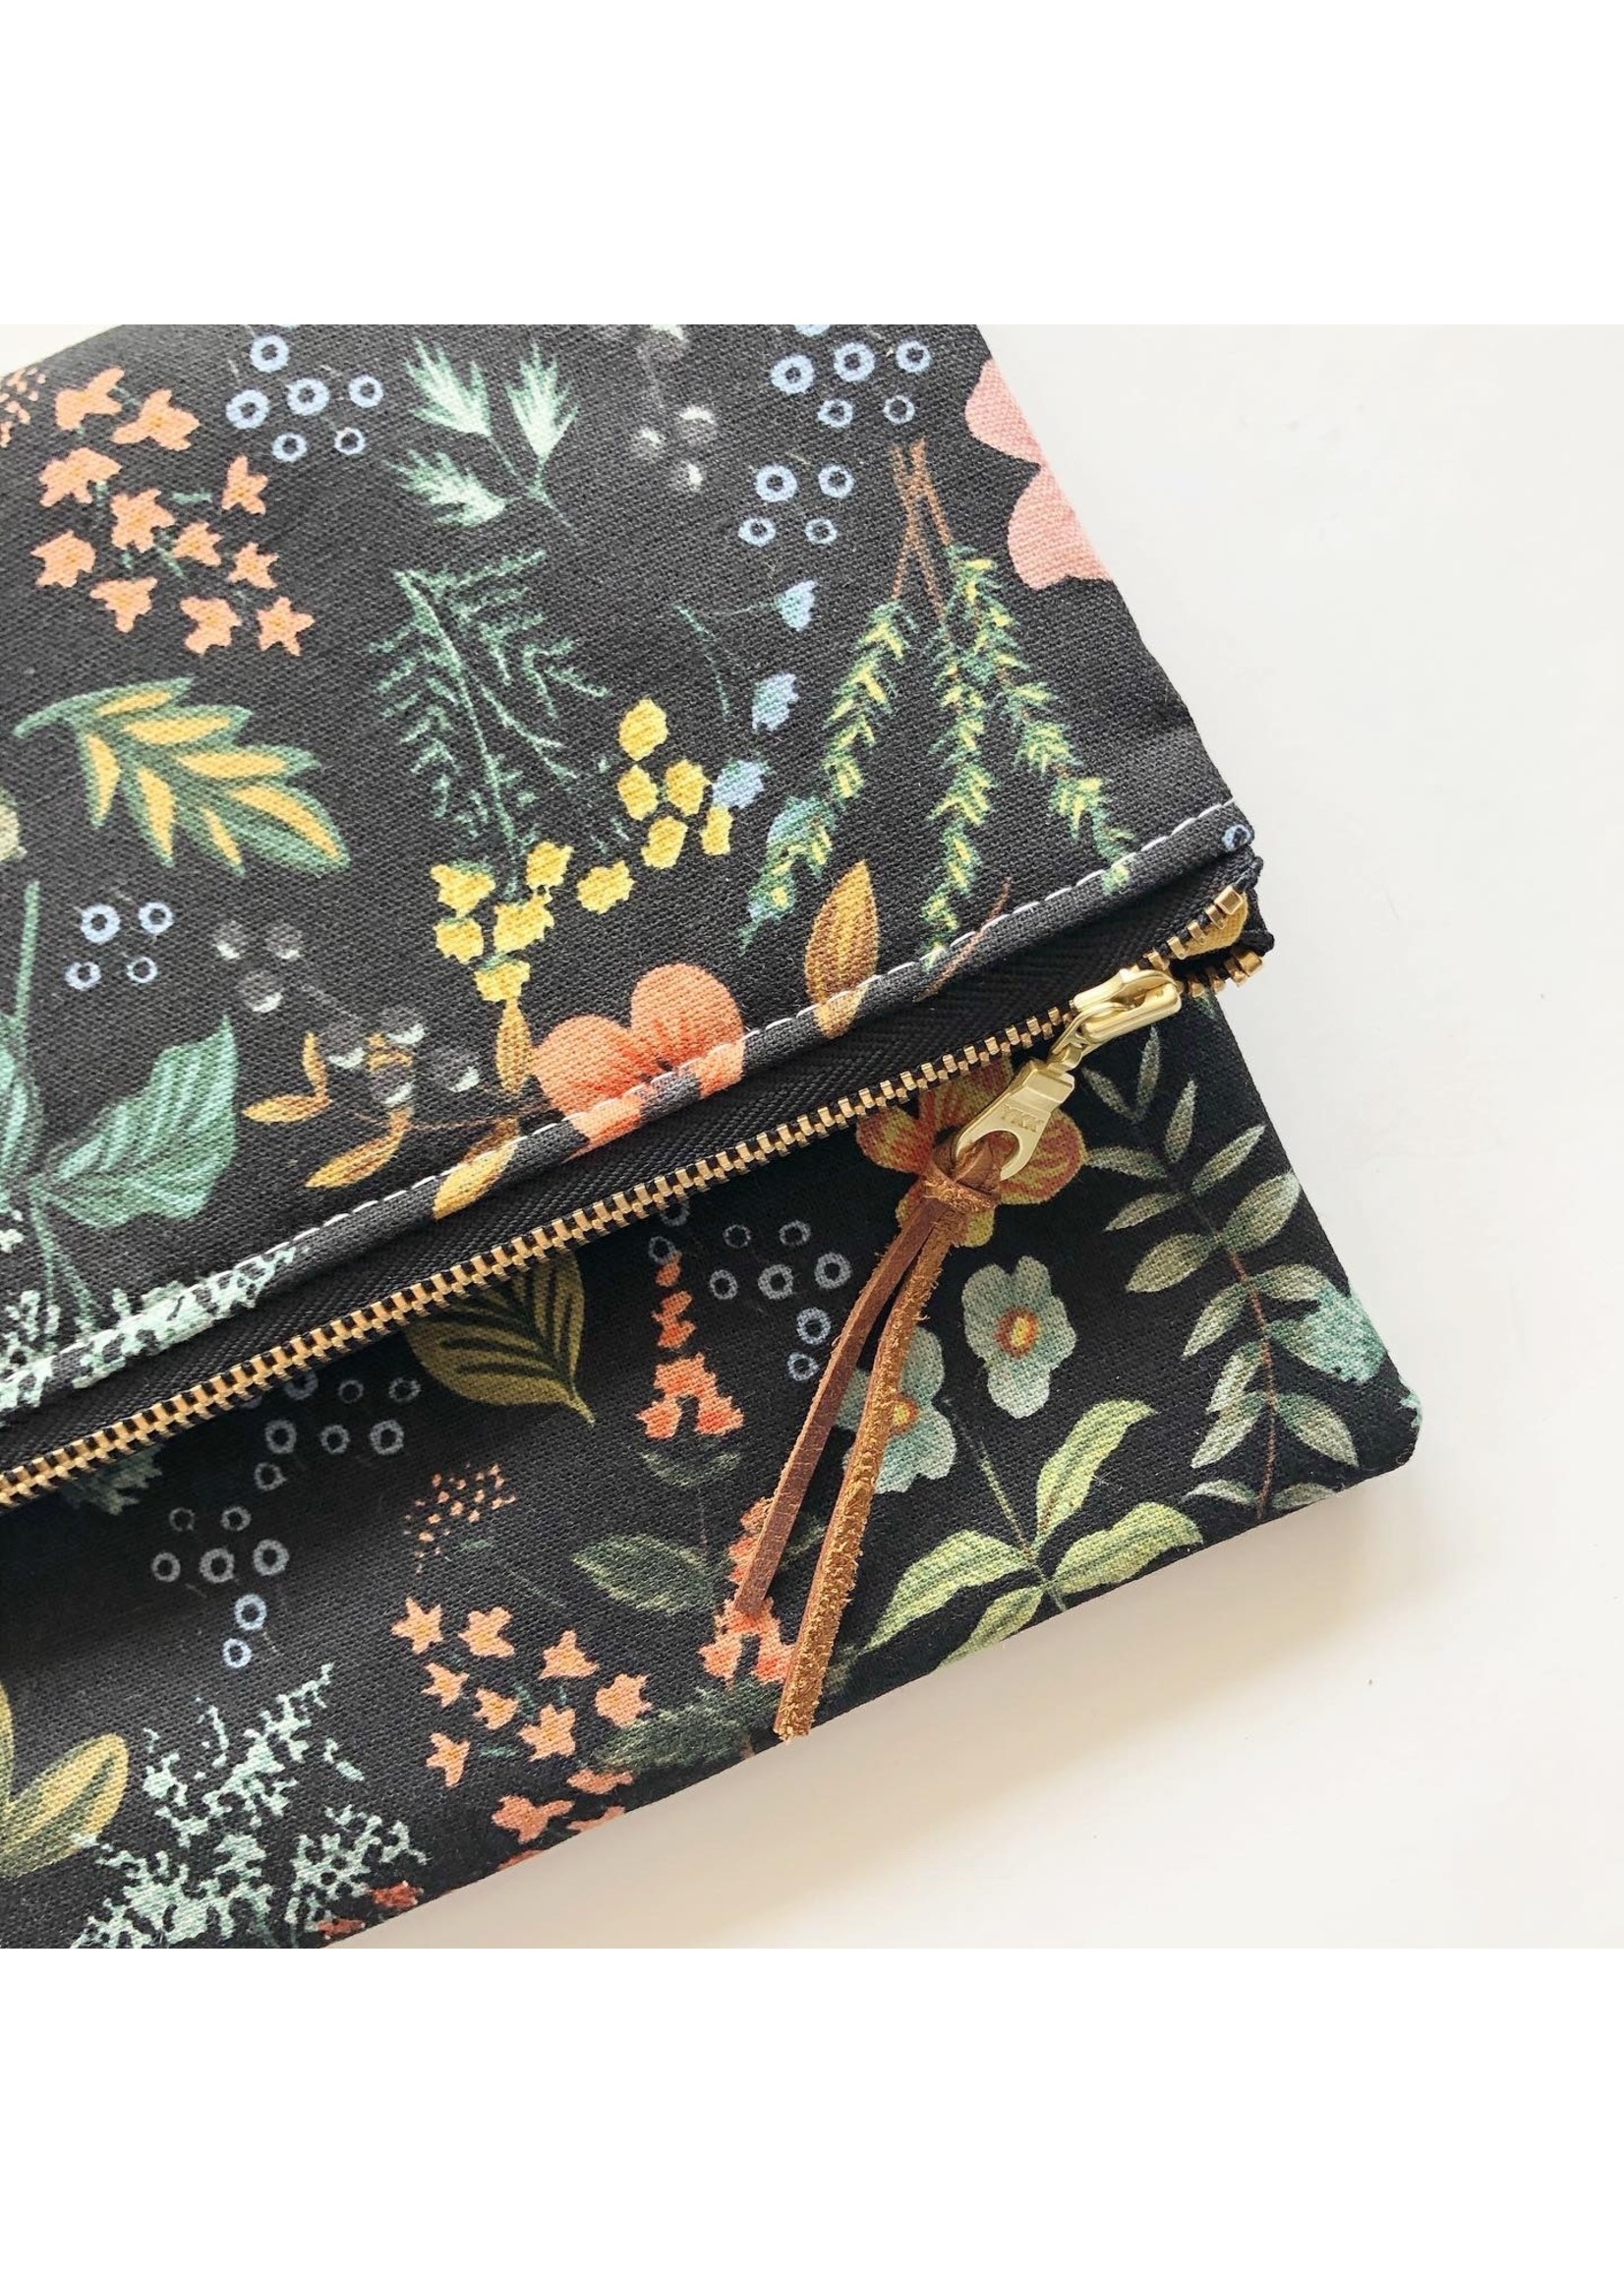 September Skye Bags & Accessories Fold Over Clutch